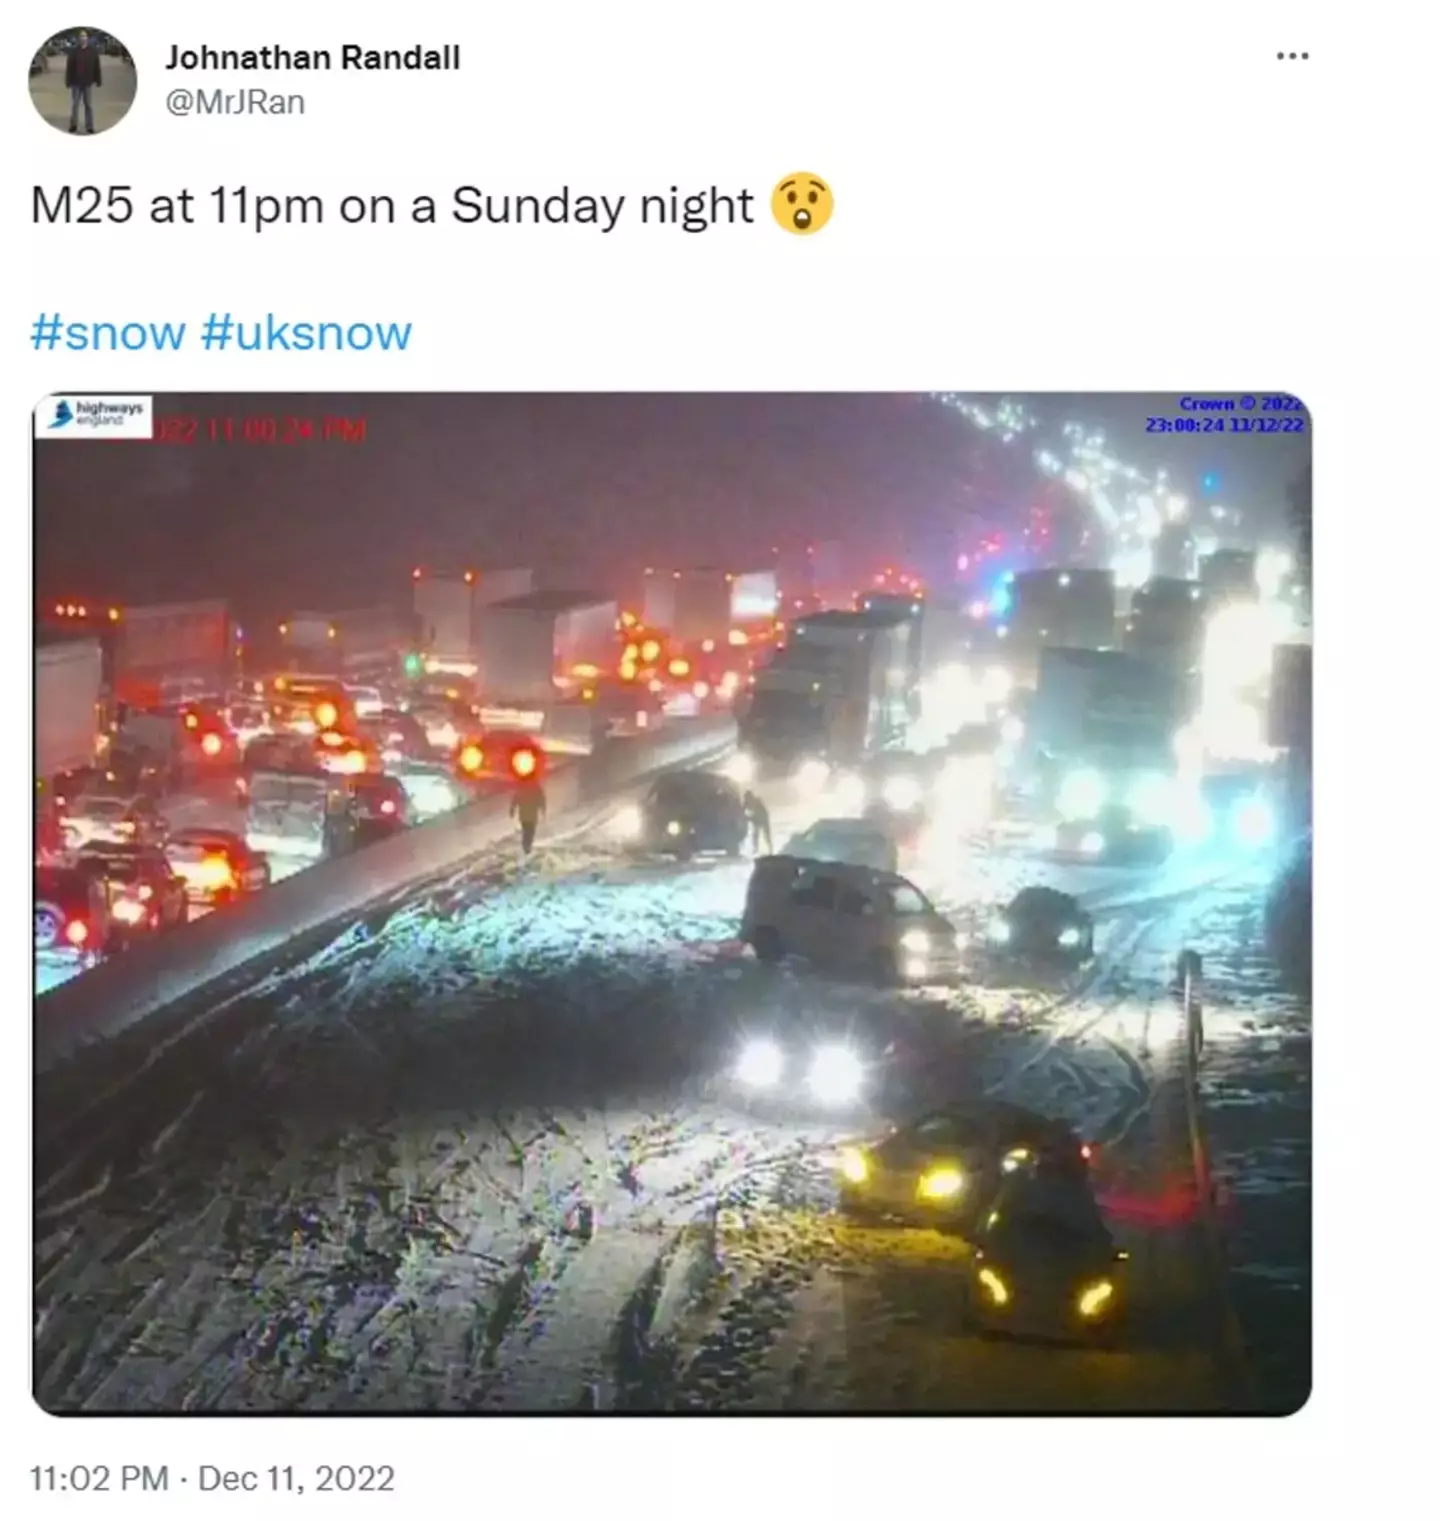 Motorists were stuck on the M25 with their vehicles trapped by the snowy conditions.